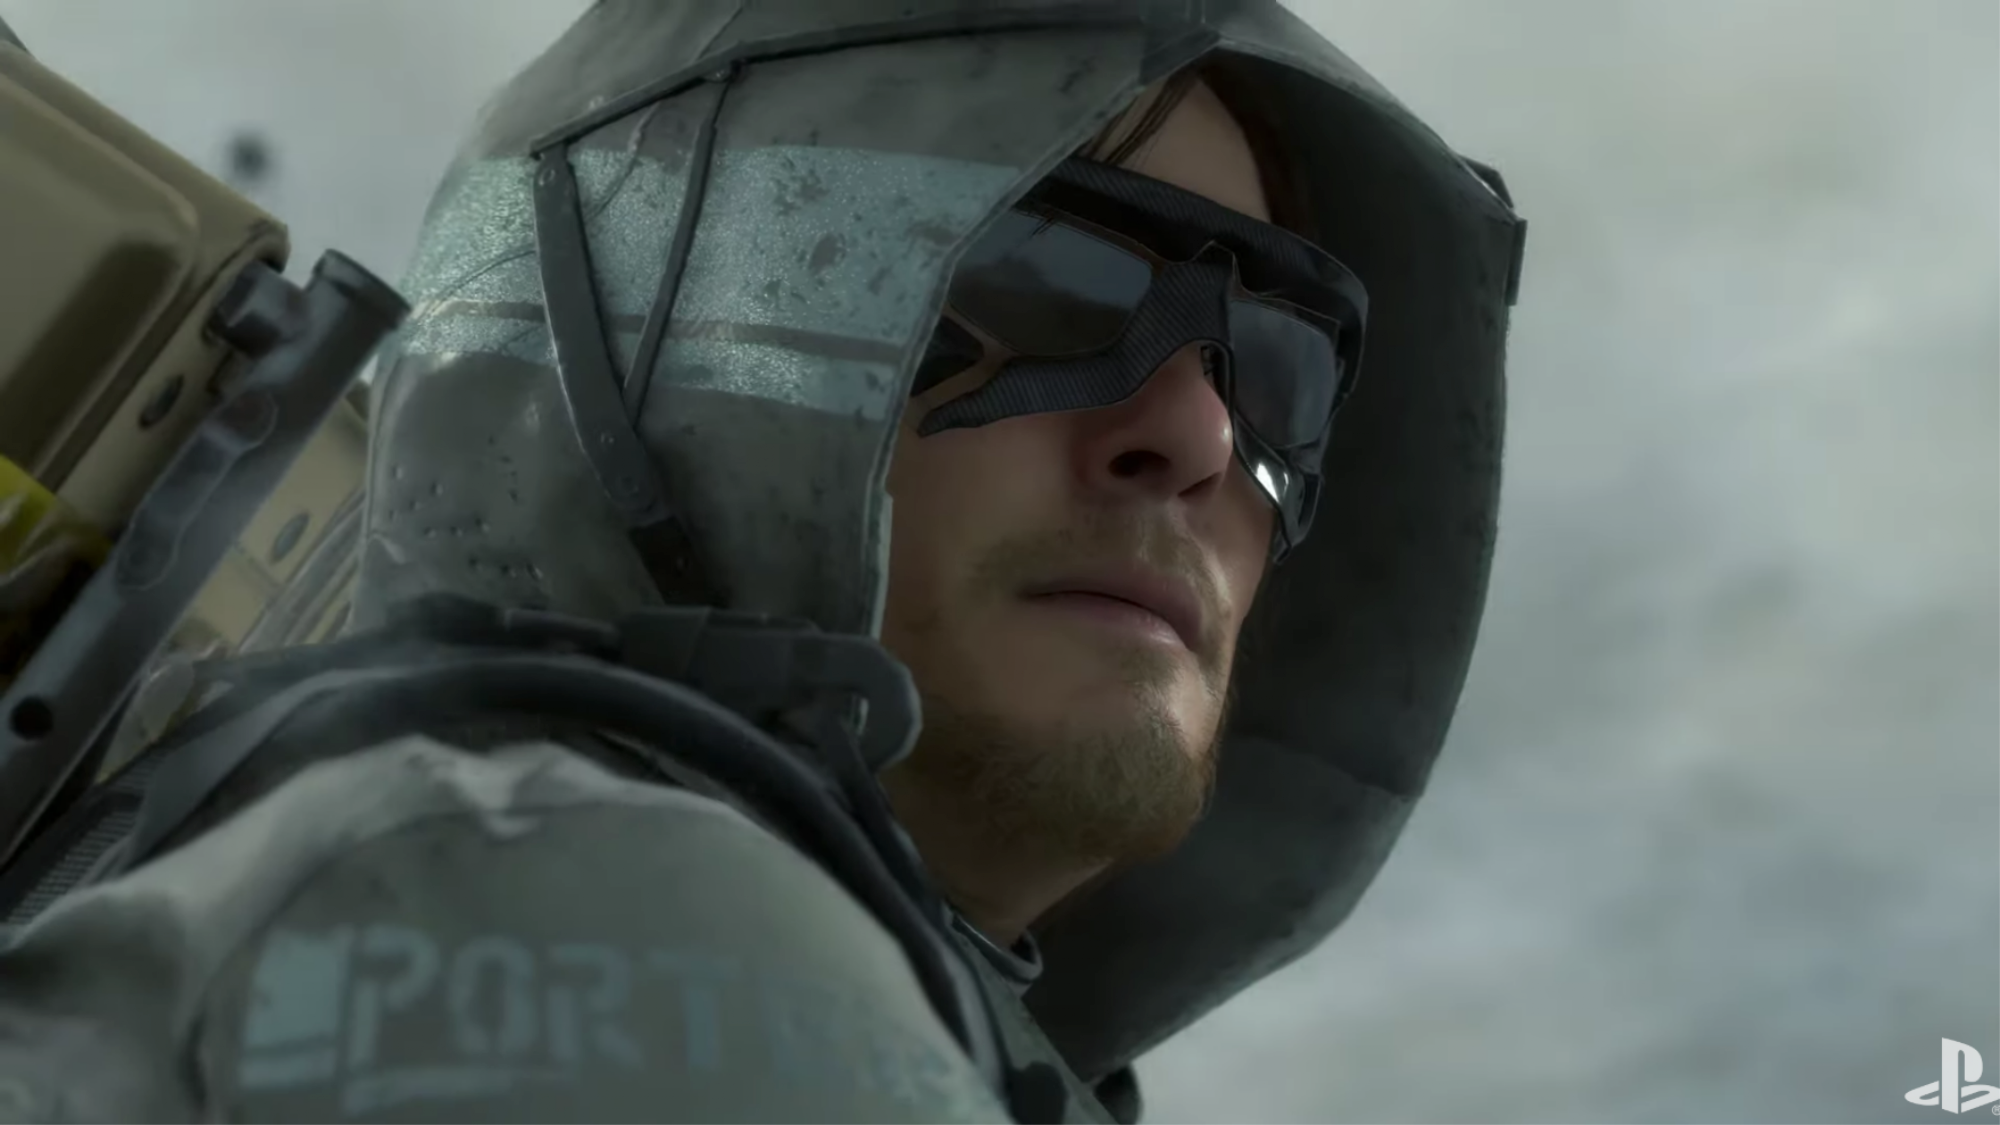 Hideo Kojima’s Death Stranding is All set to release on November 8th